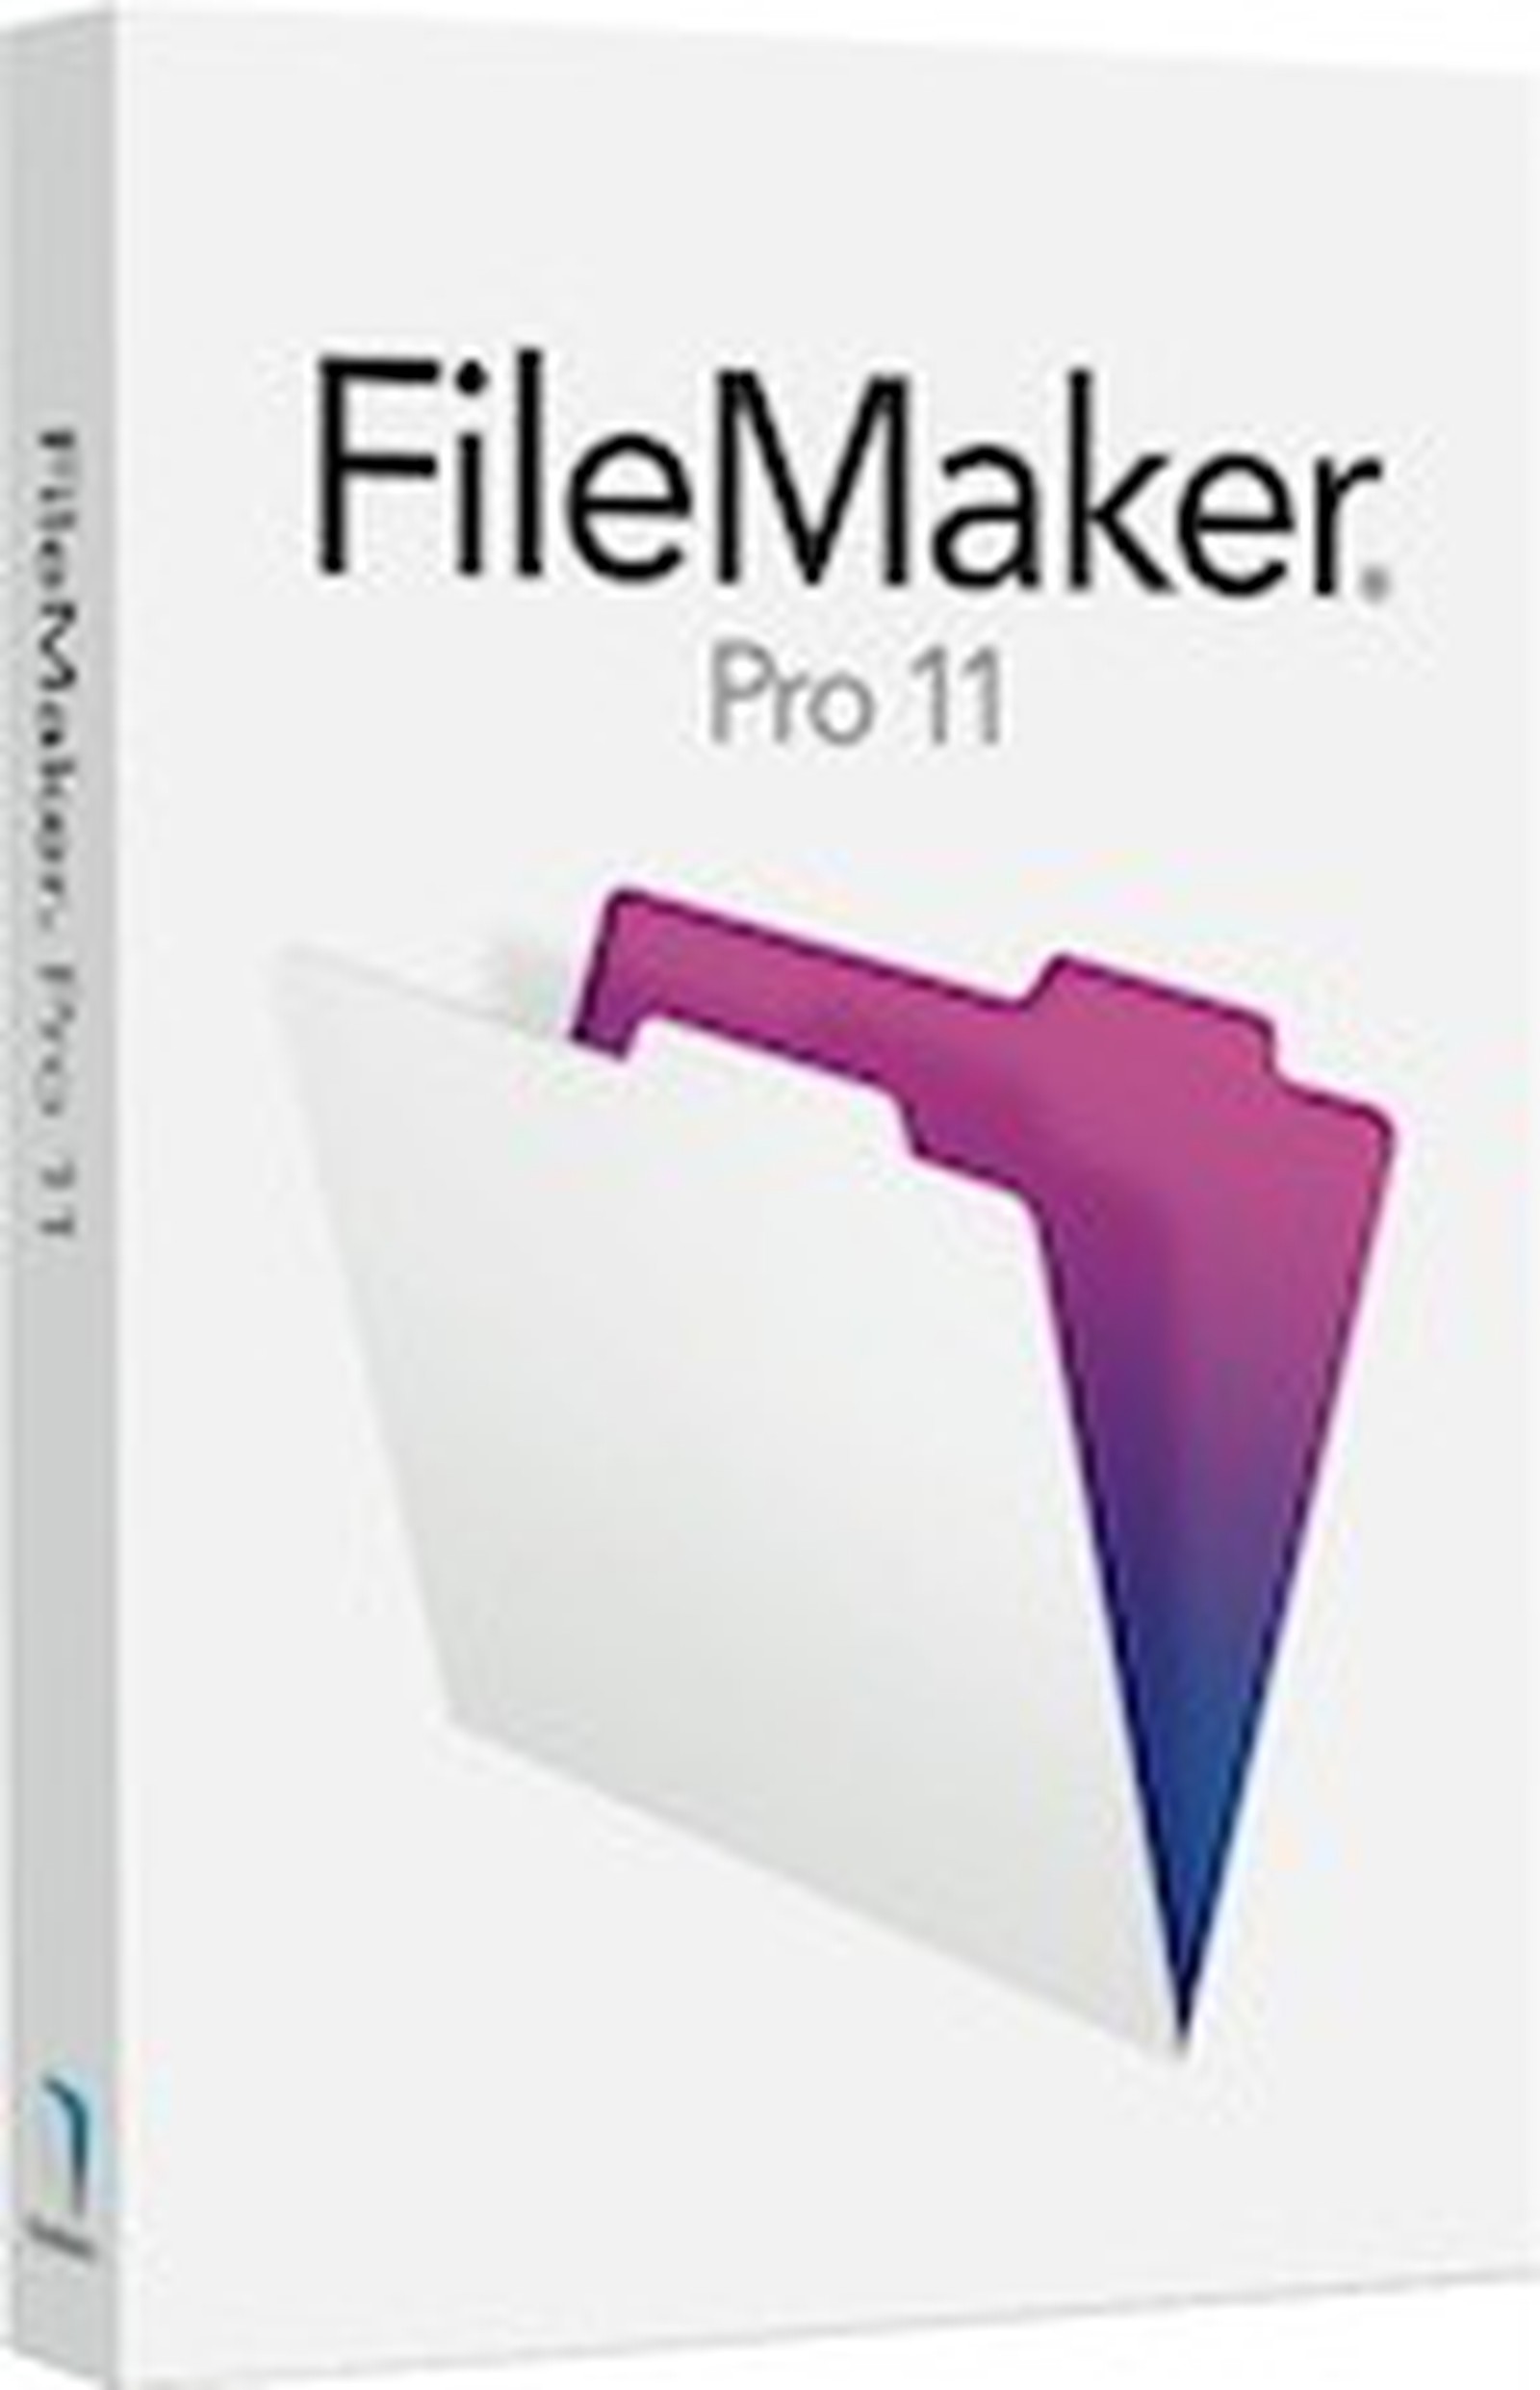 filemaker pro 11 for mac download